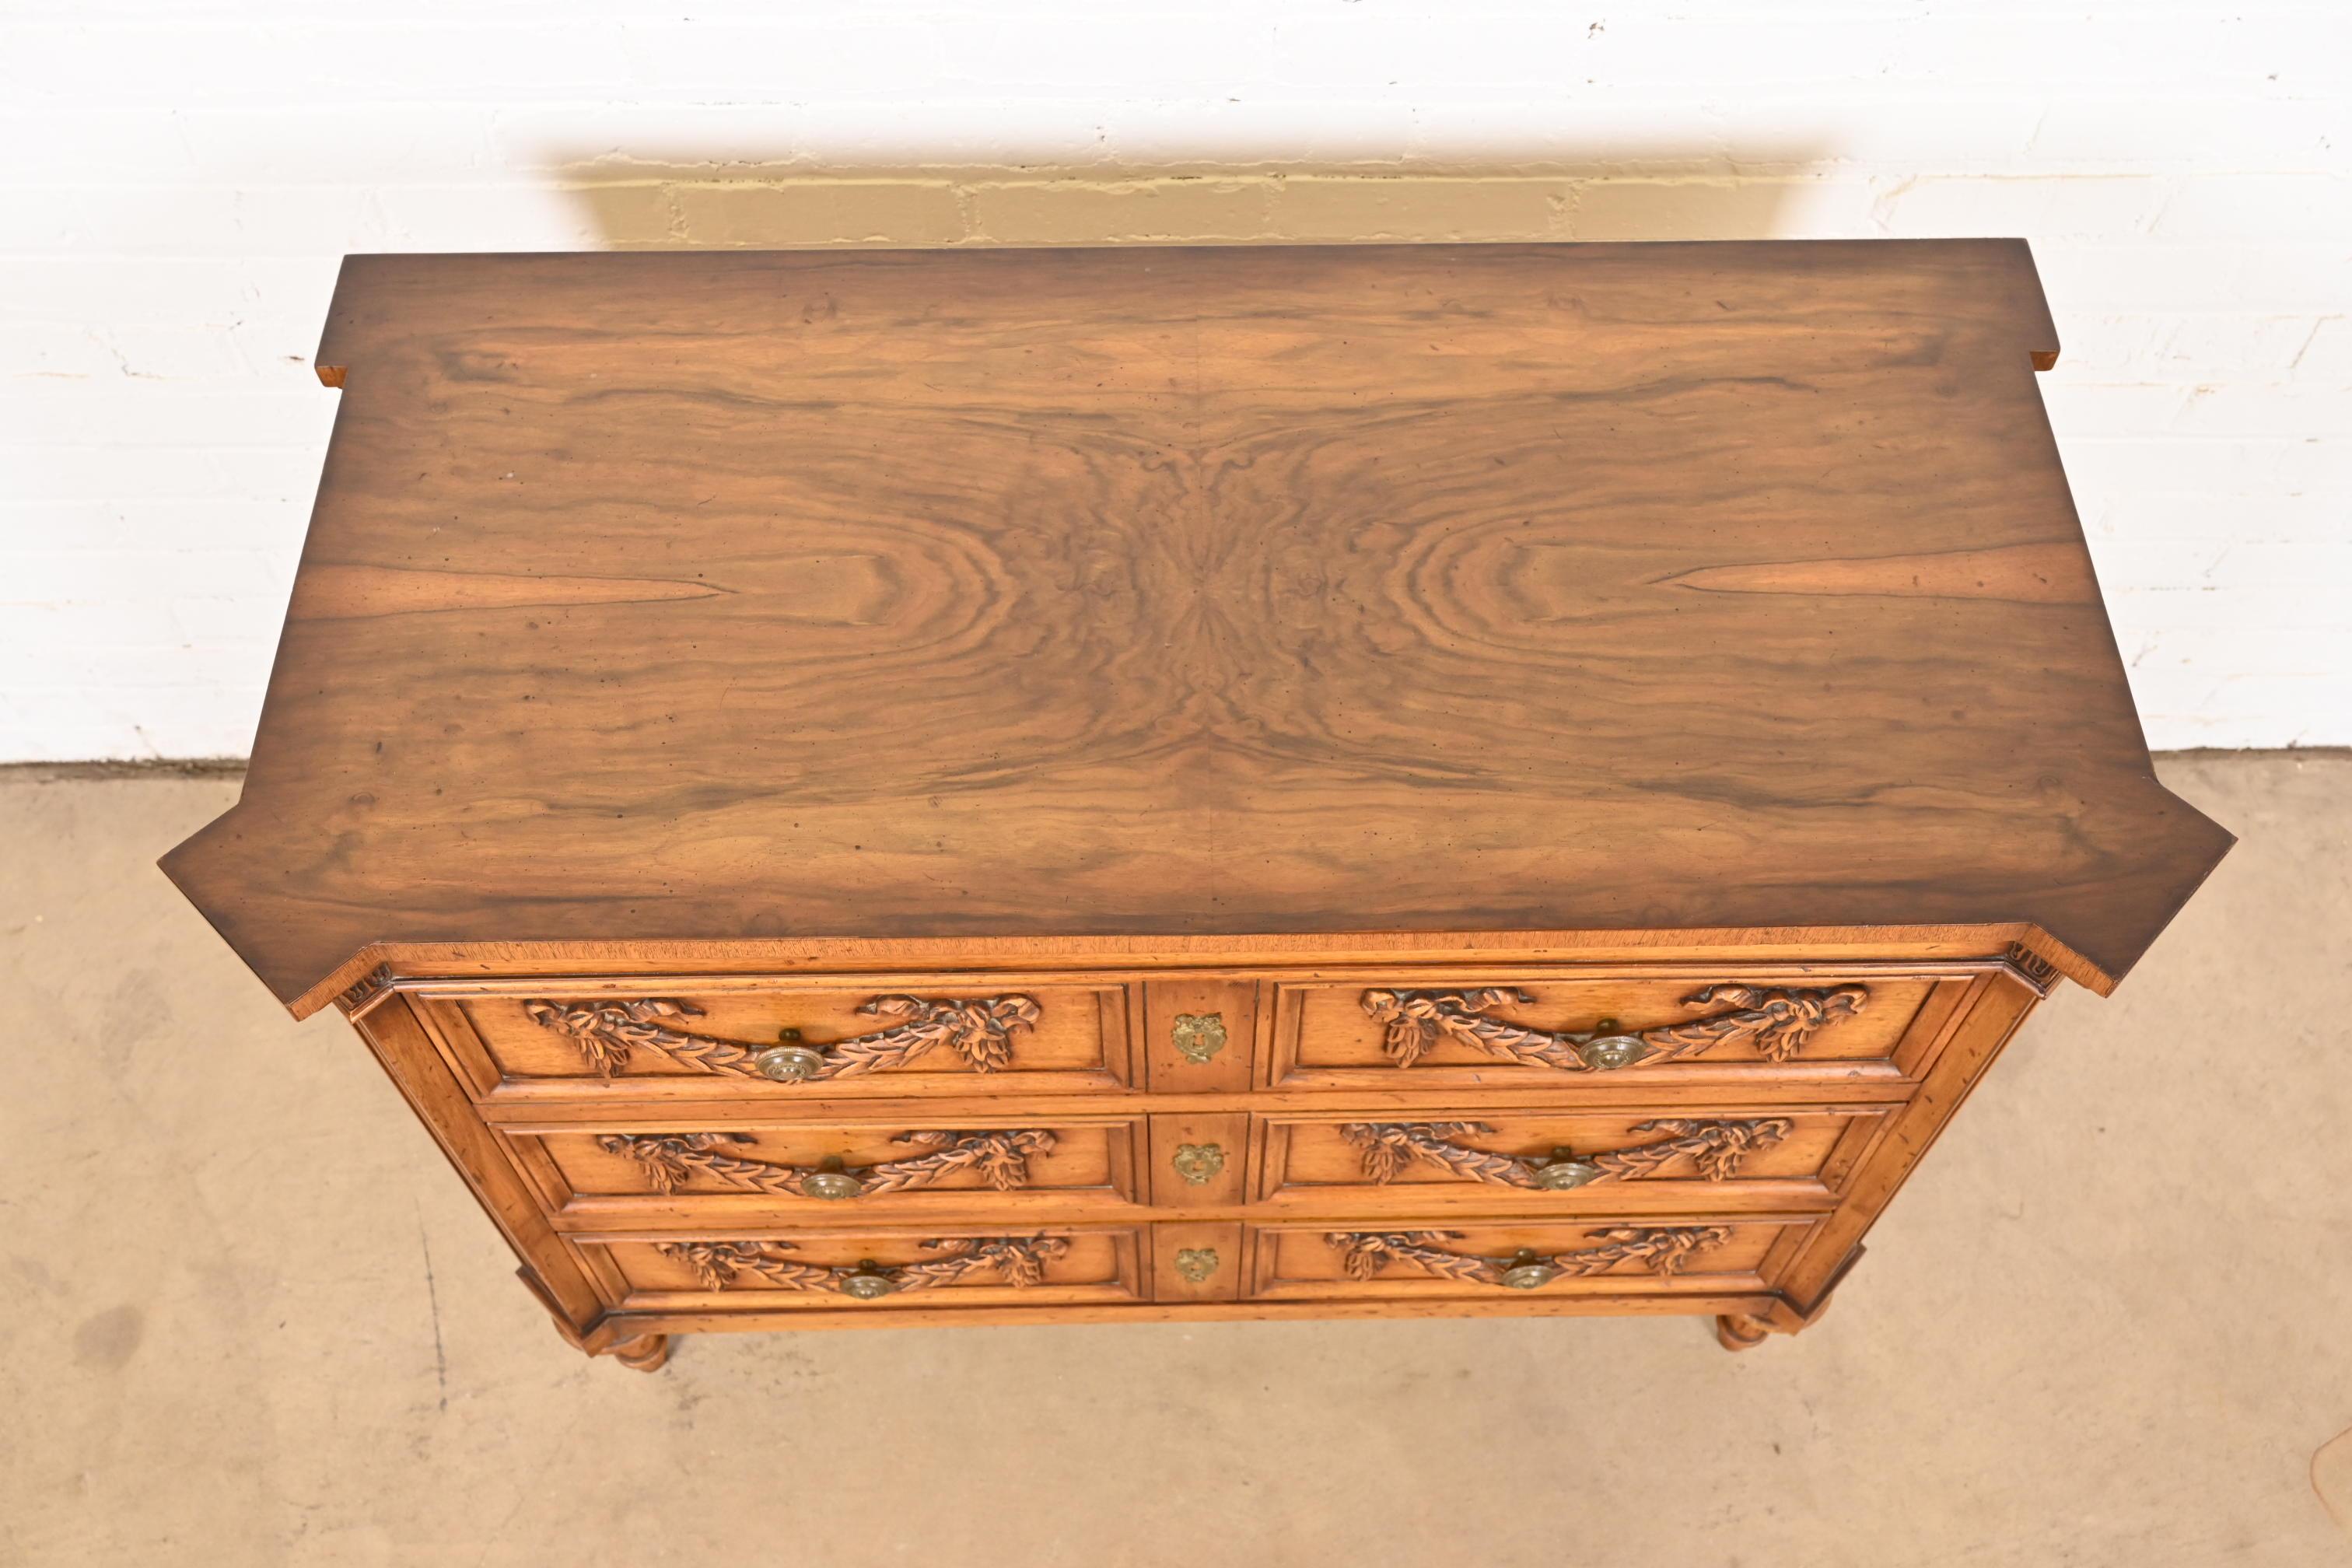 Karges French Regency Louis XVI Burled Walnut Dresser or Chest of Drawers For Sale 9